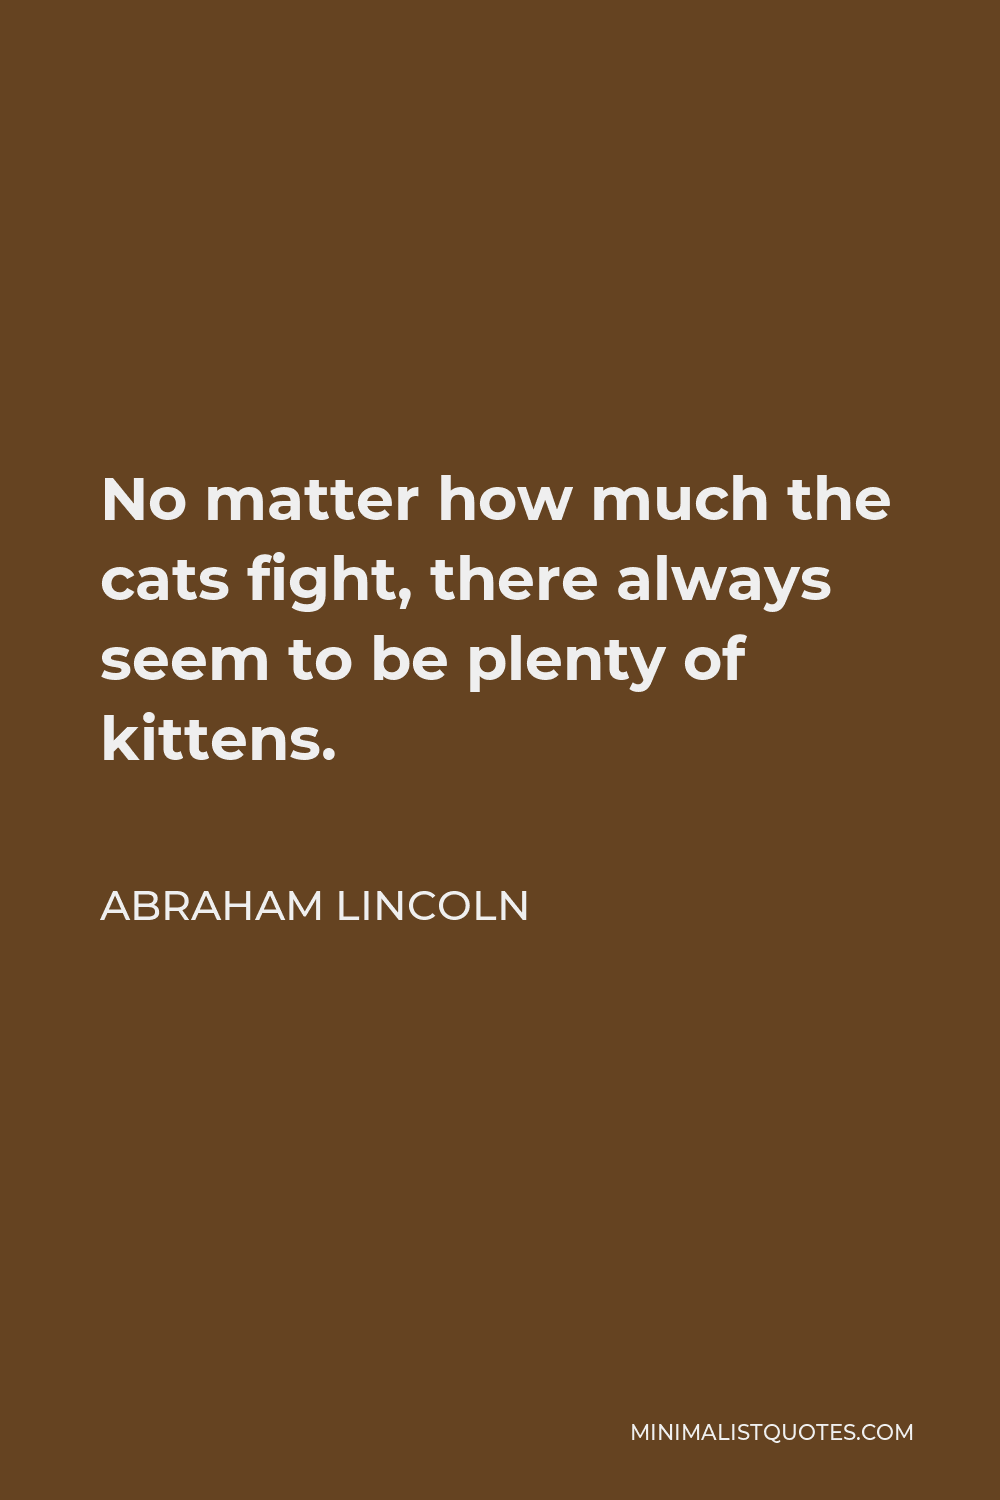 Abraham Lincoln Quote - No matter how much the cats fight, there always seem to be plenty of kittens.